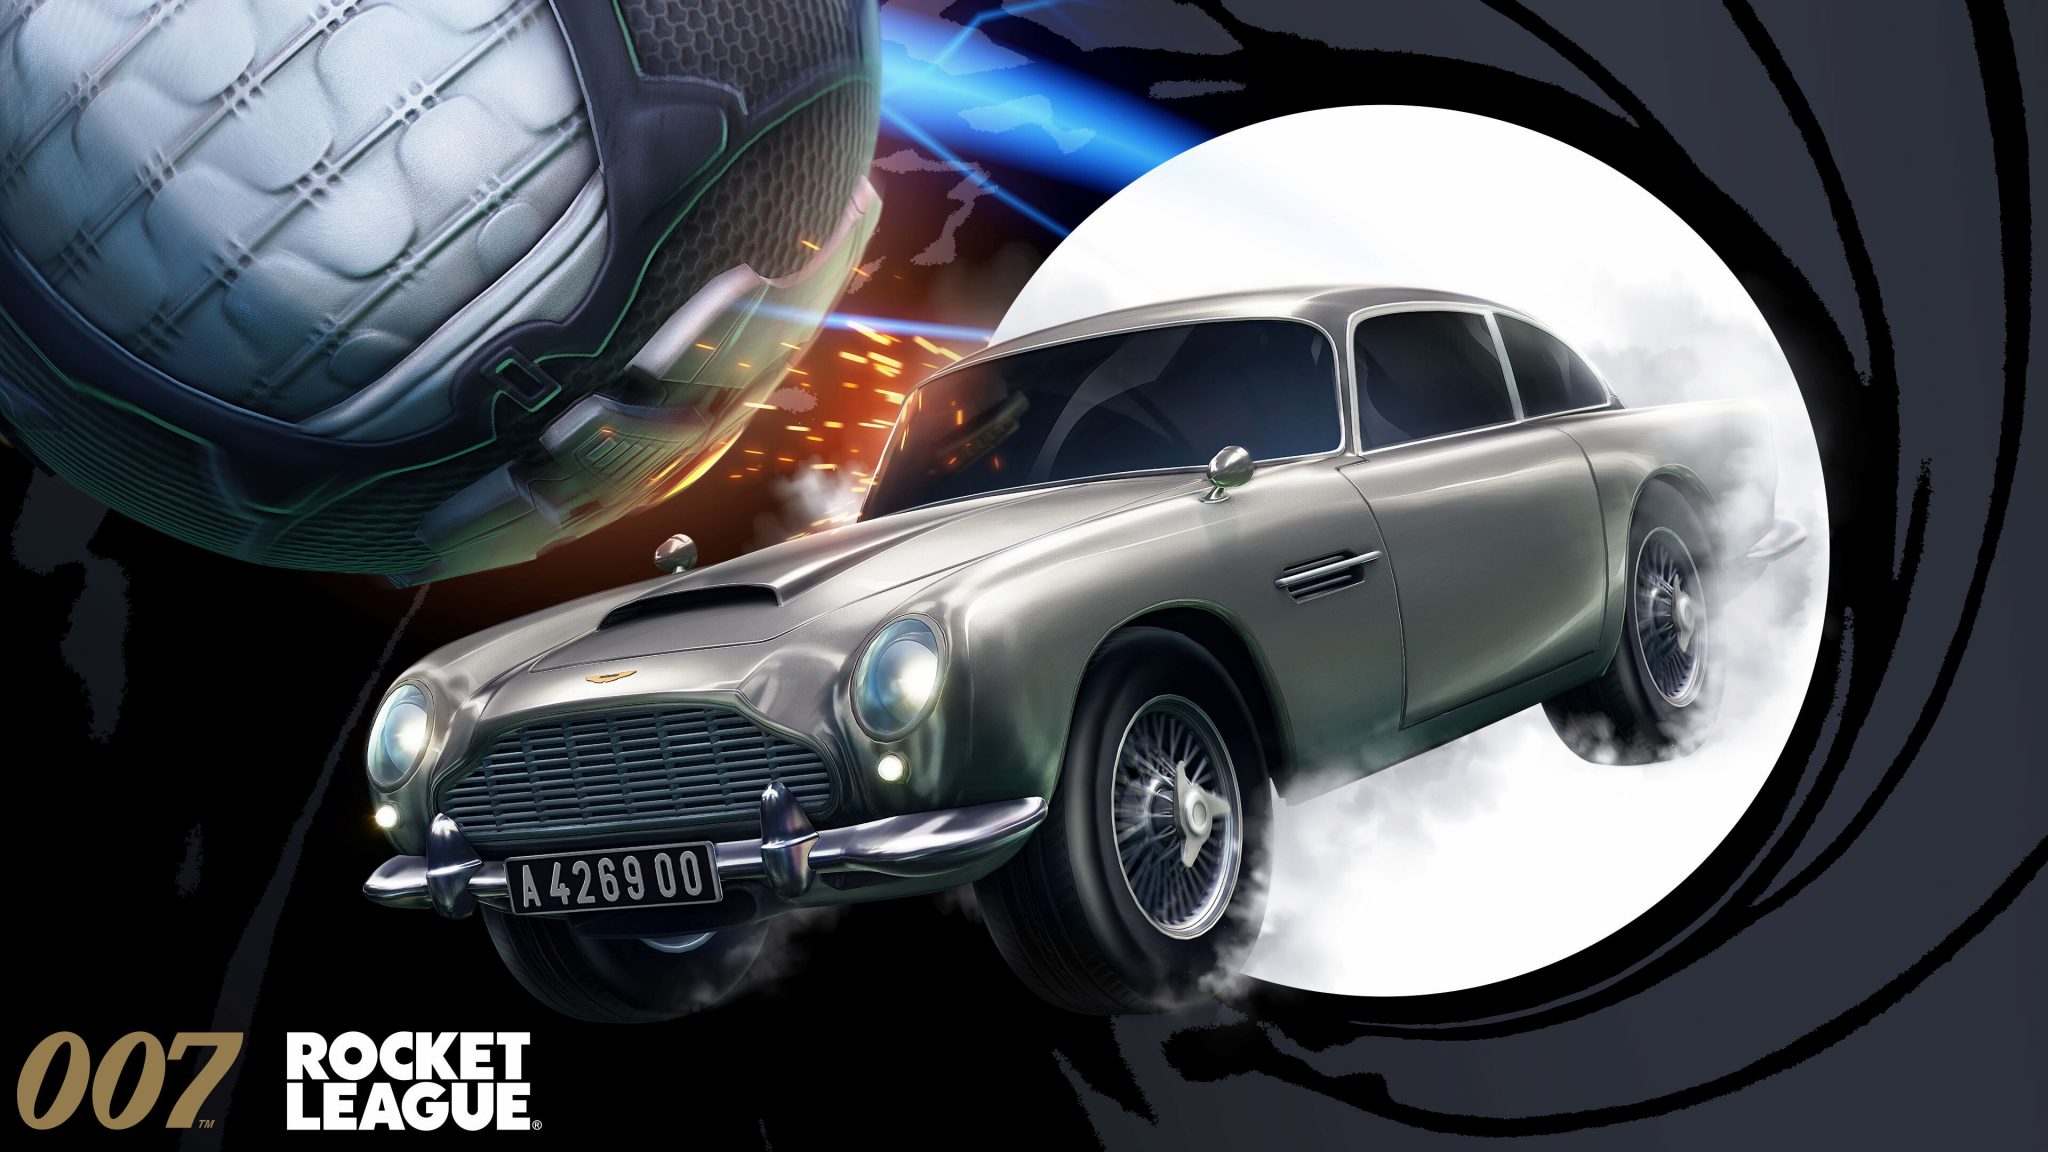 James Bond’s Aston Martin DB5 Is Coming To Rocket League